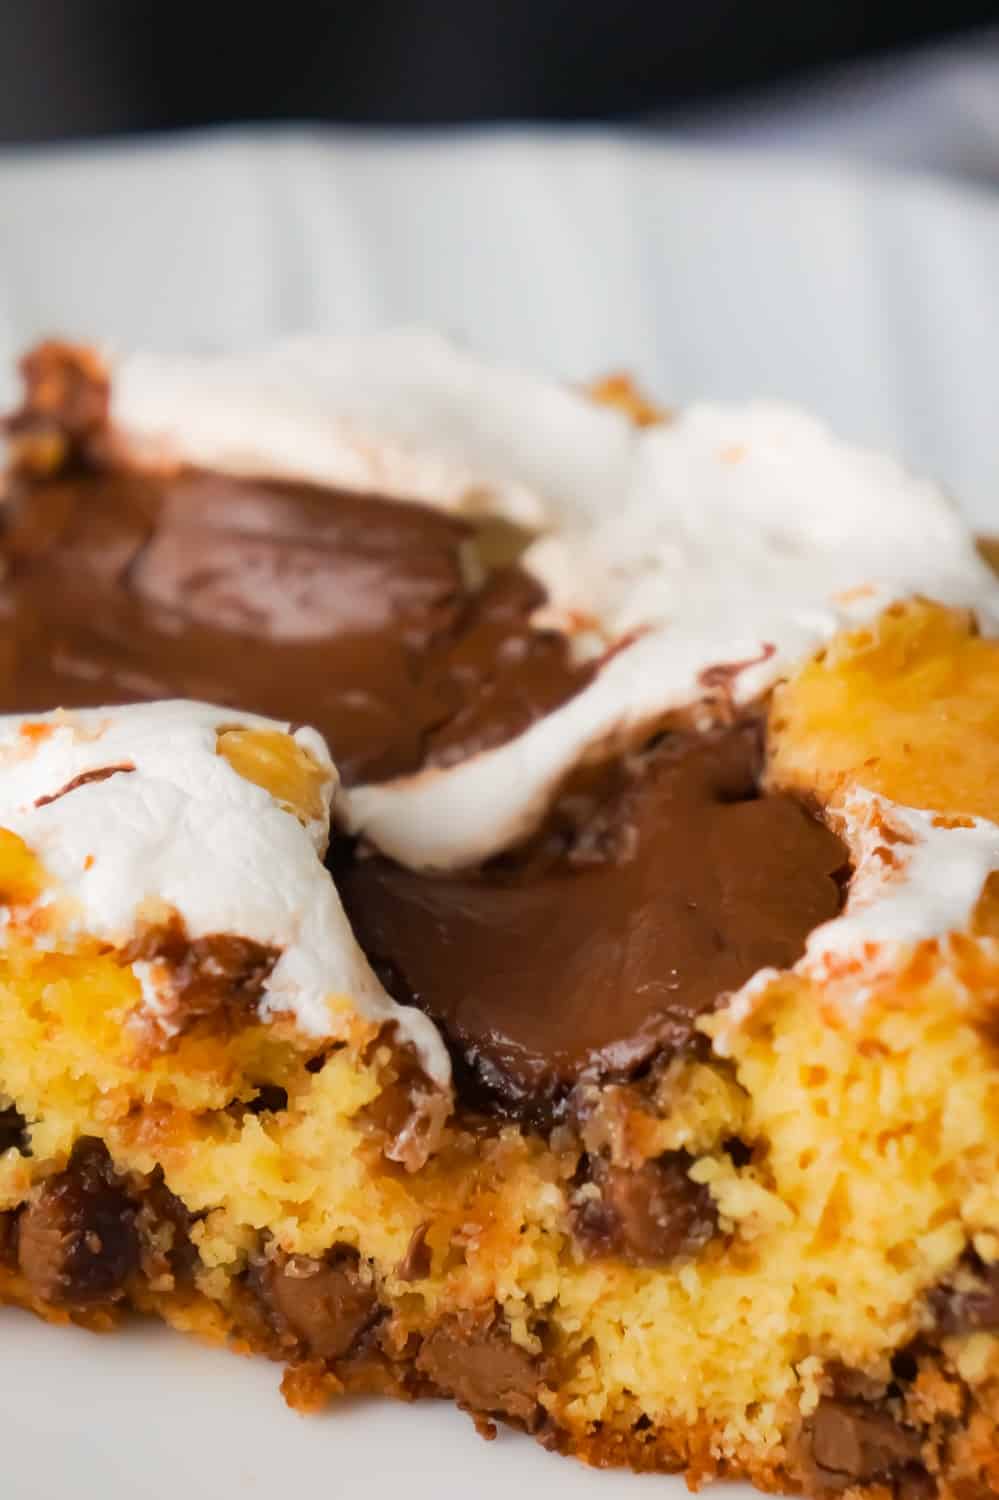 Nutella S'mores Cookie Cake is an easy dessert recipe using boxed cake mix. This delicious chocolate chip cookie cake is loaded with Nutella and Marshmallow Fluff.